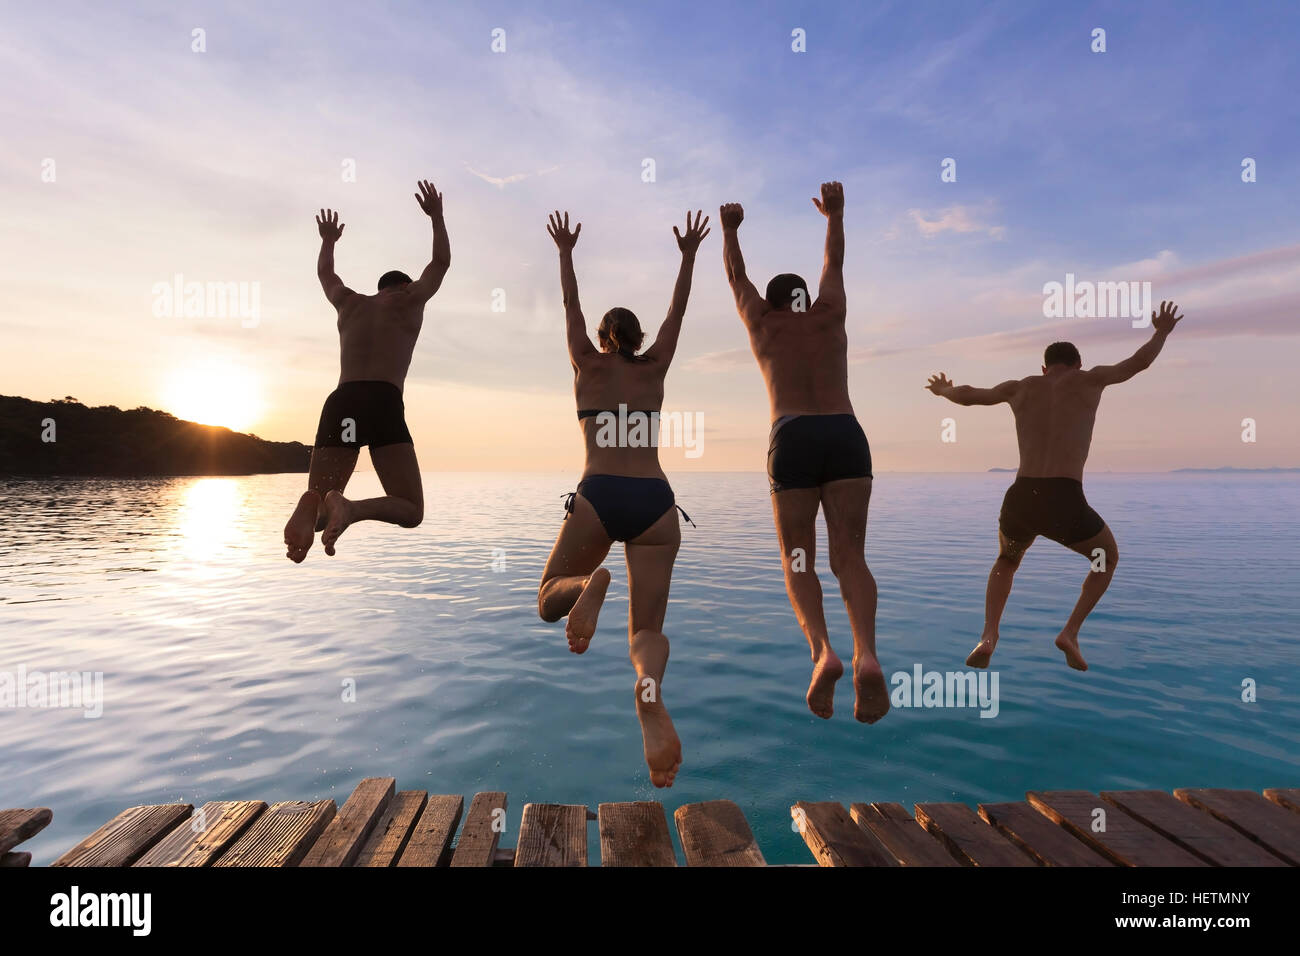 Cheerful people having fun jumping in the sea water from a pier at sunset Stock Photo